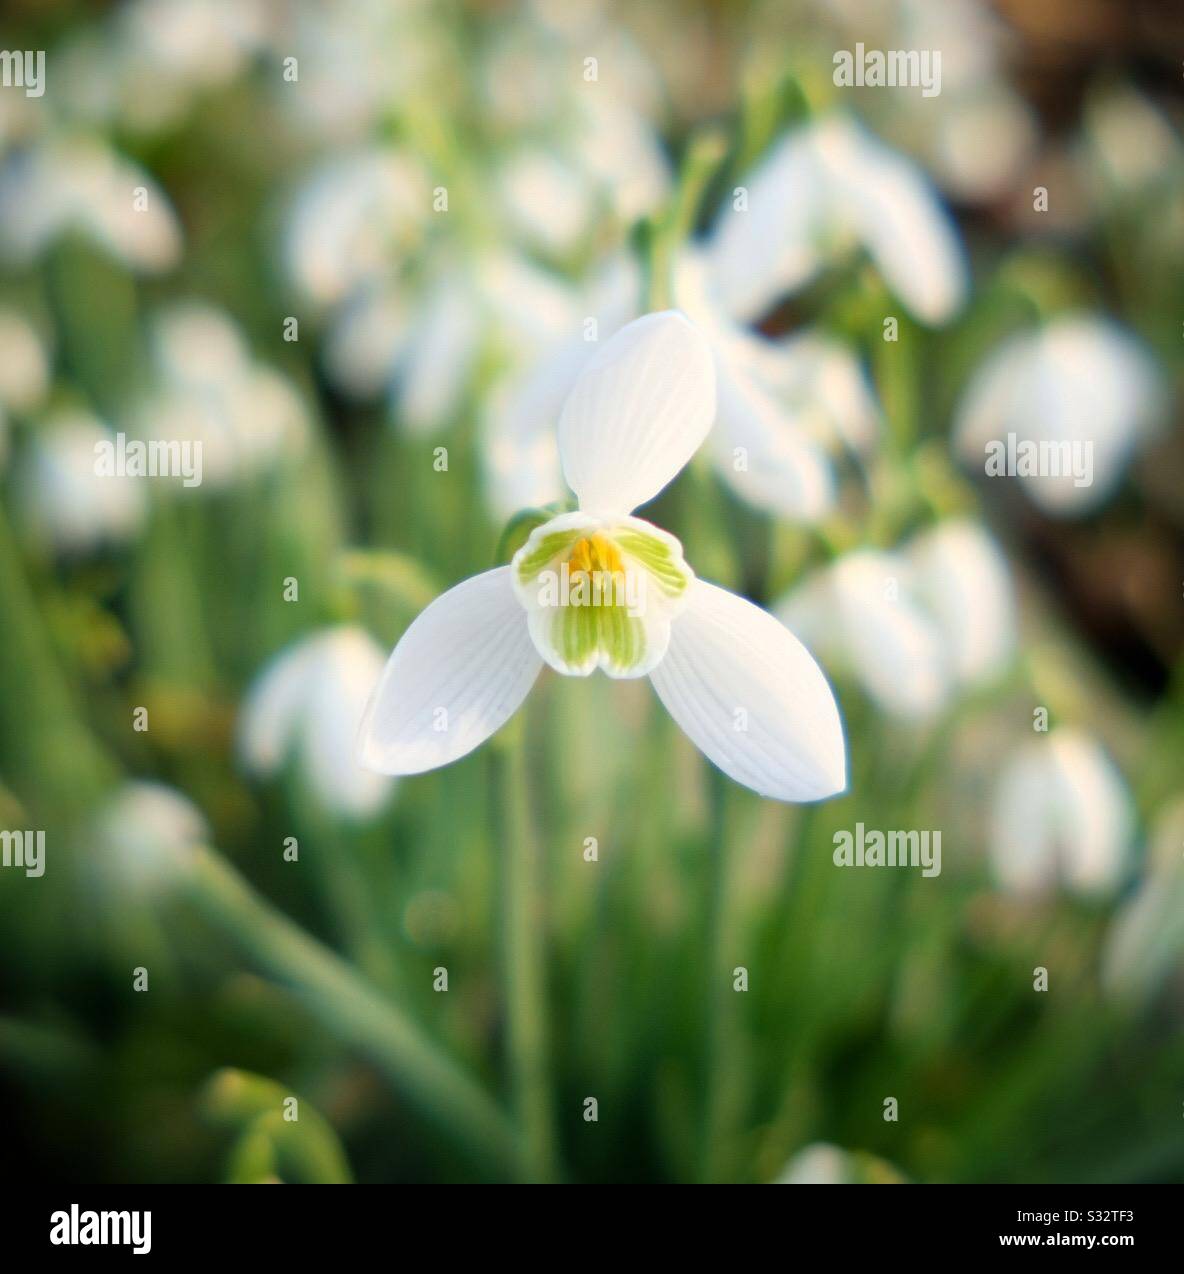 Snowdrops in bloom Stock Photo